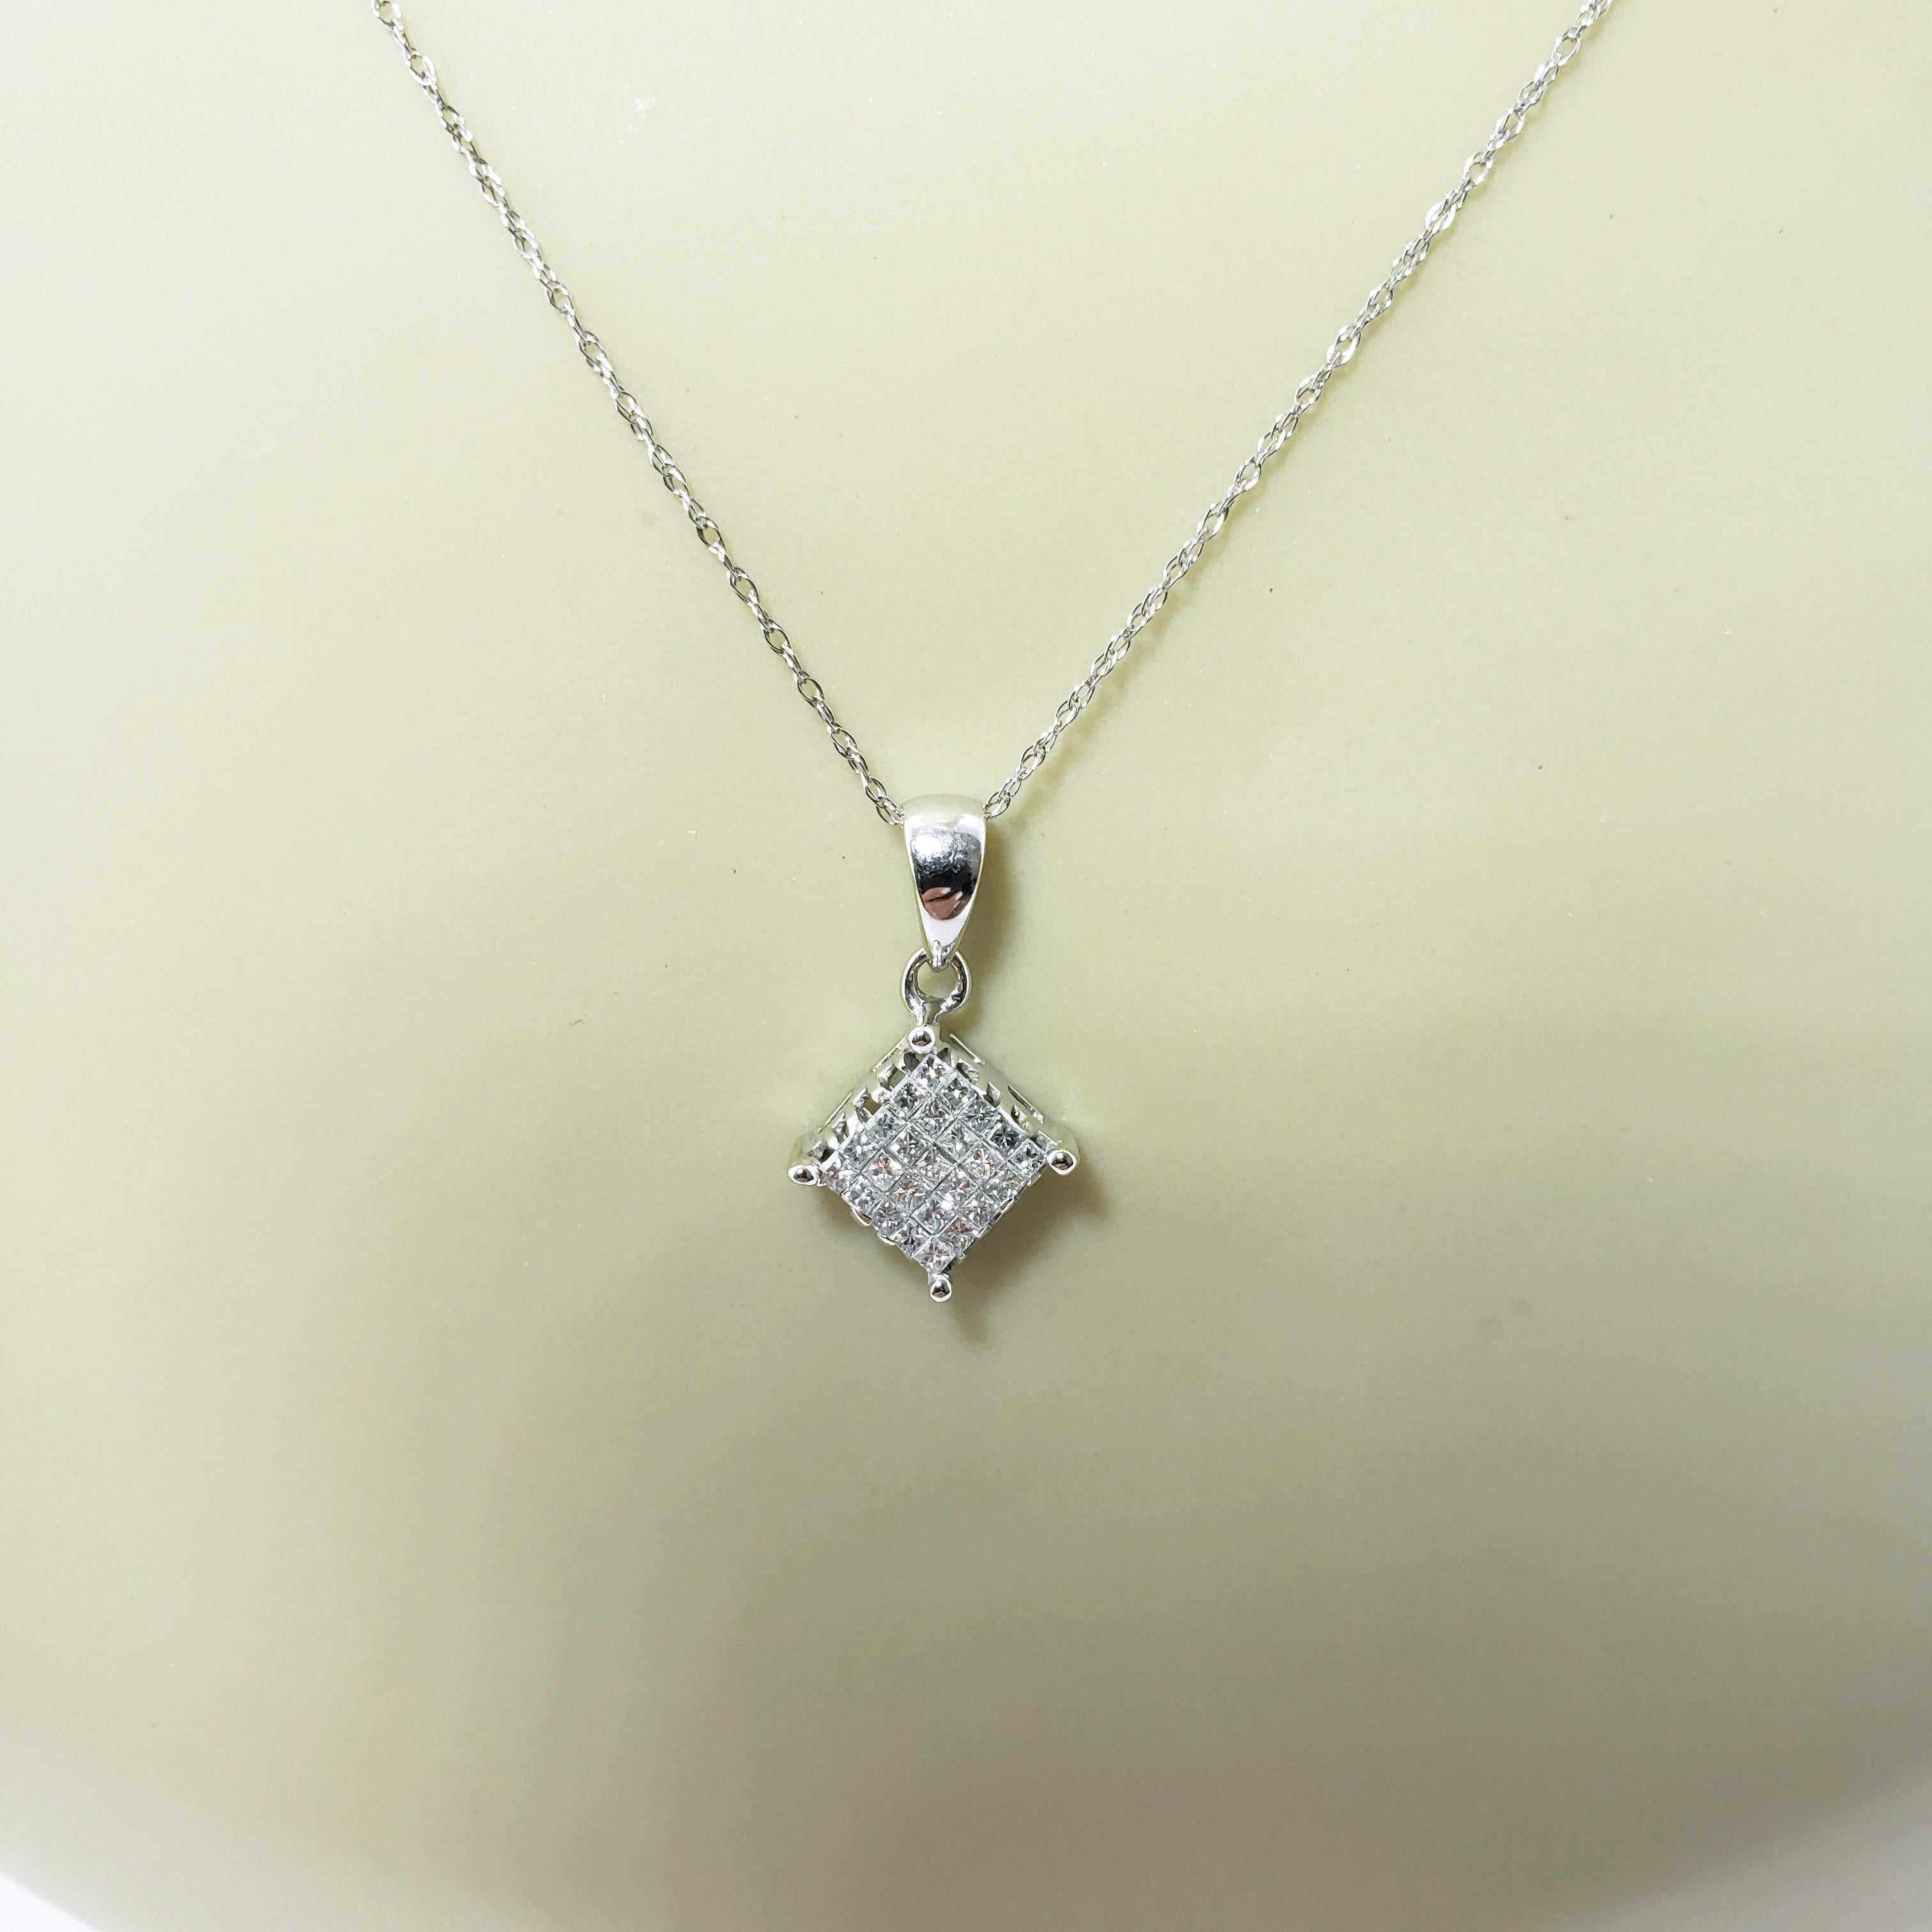 10 Karat White Gold and Diamond Pendant Necklace For Sale 3